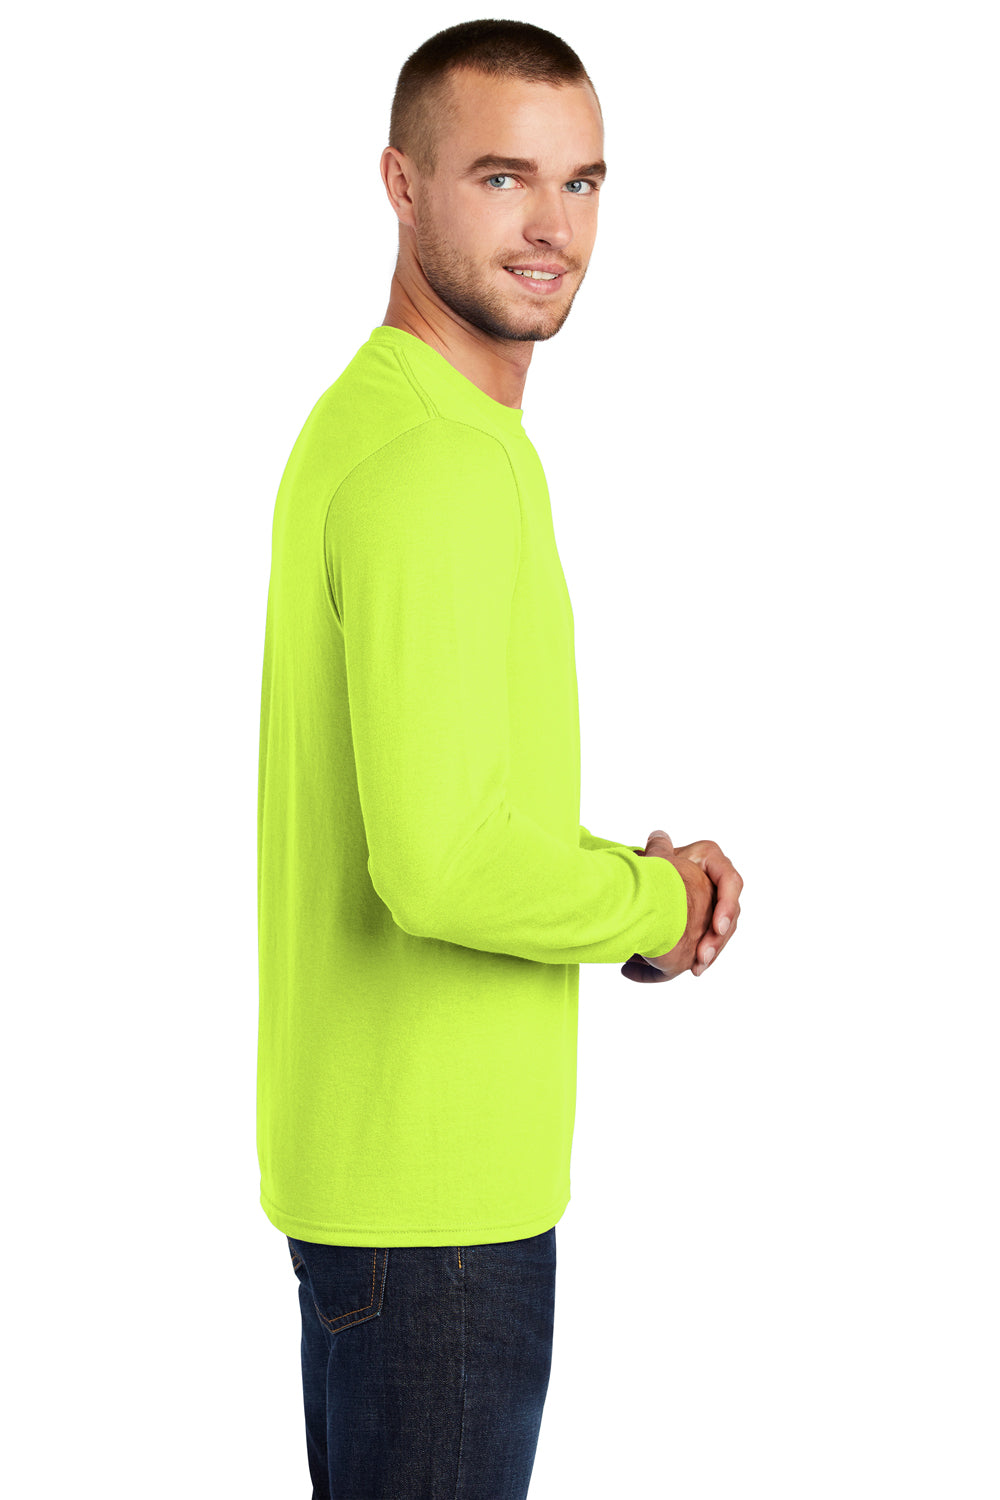 Port & Company PC55LS Mens Core Long Sleeve Crewneck T-Shirt Safety Green Side